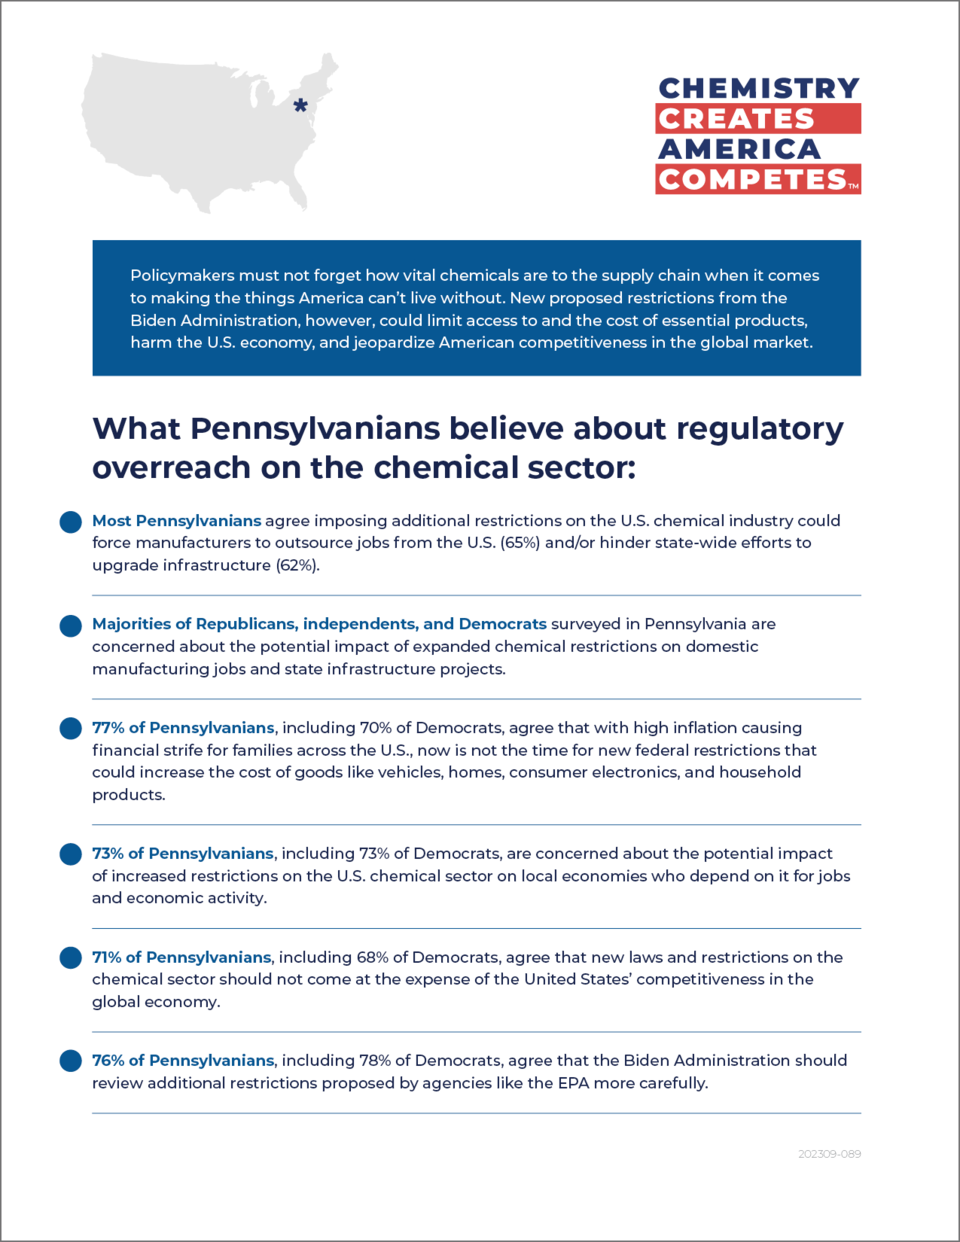 What Pennsylvanians Believe About Regulatory Overreach on Chemical Sector - Fact Sheet